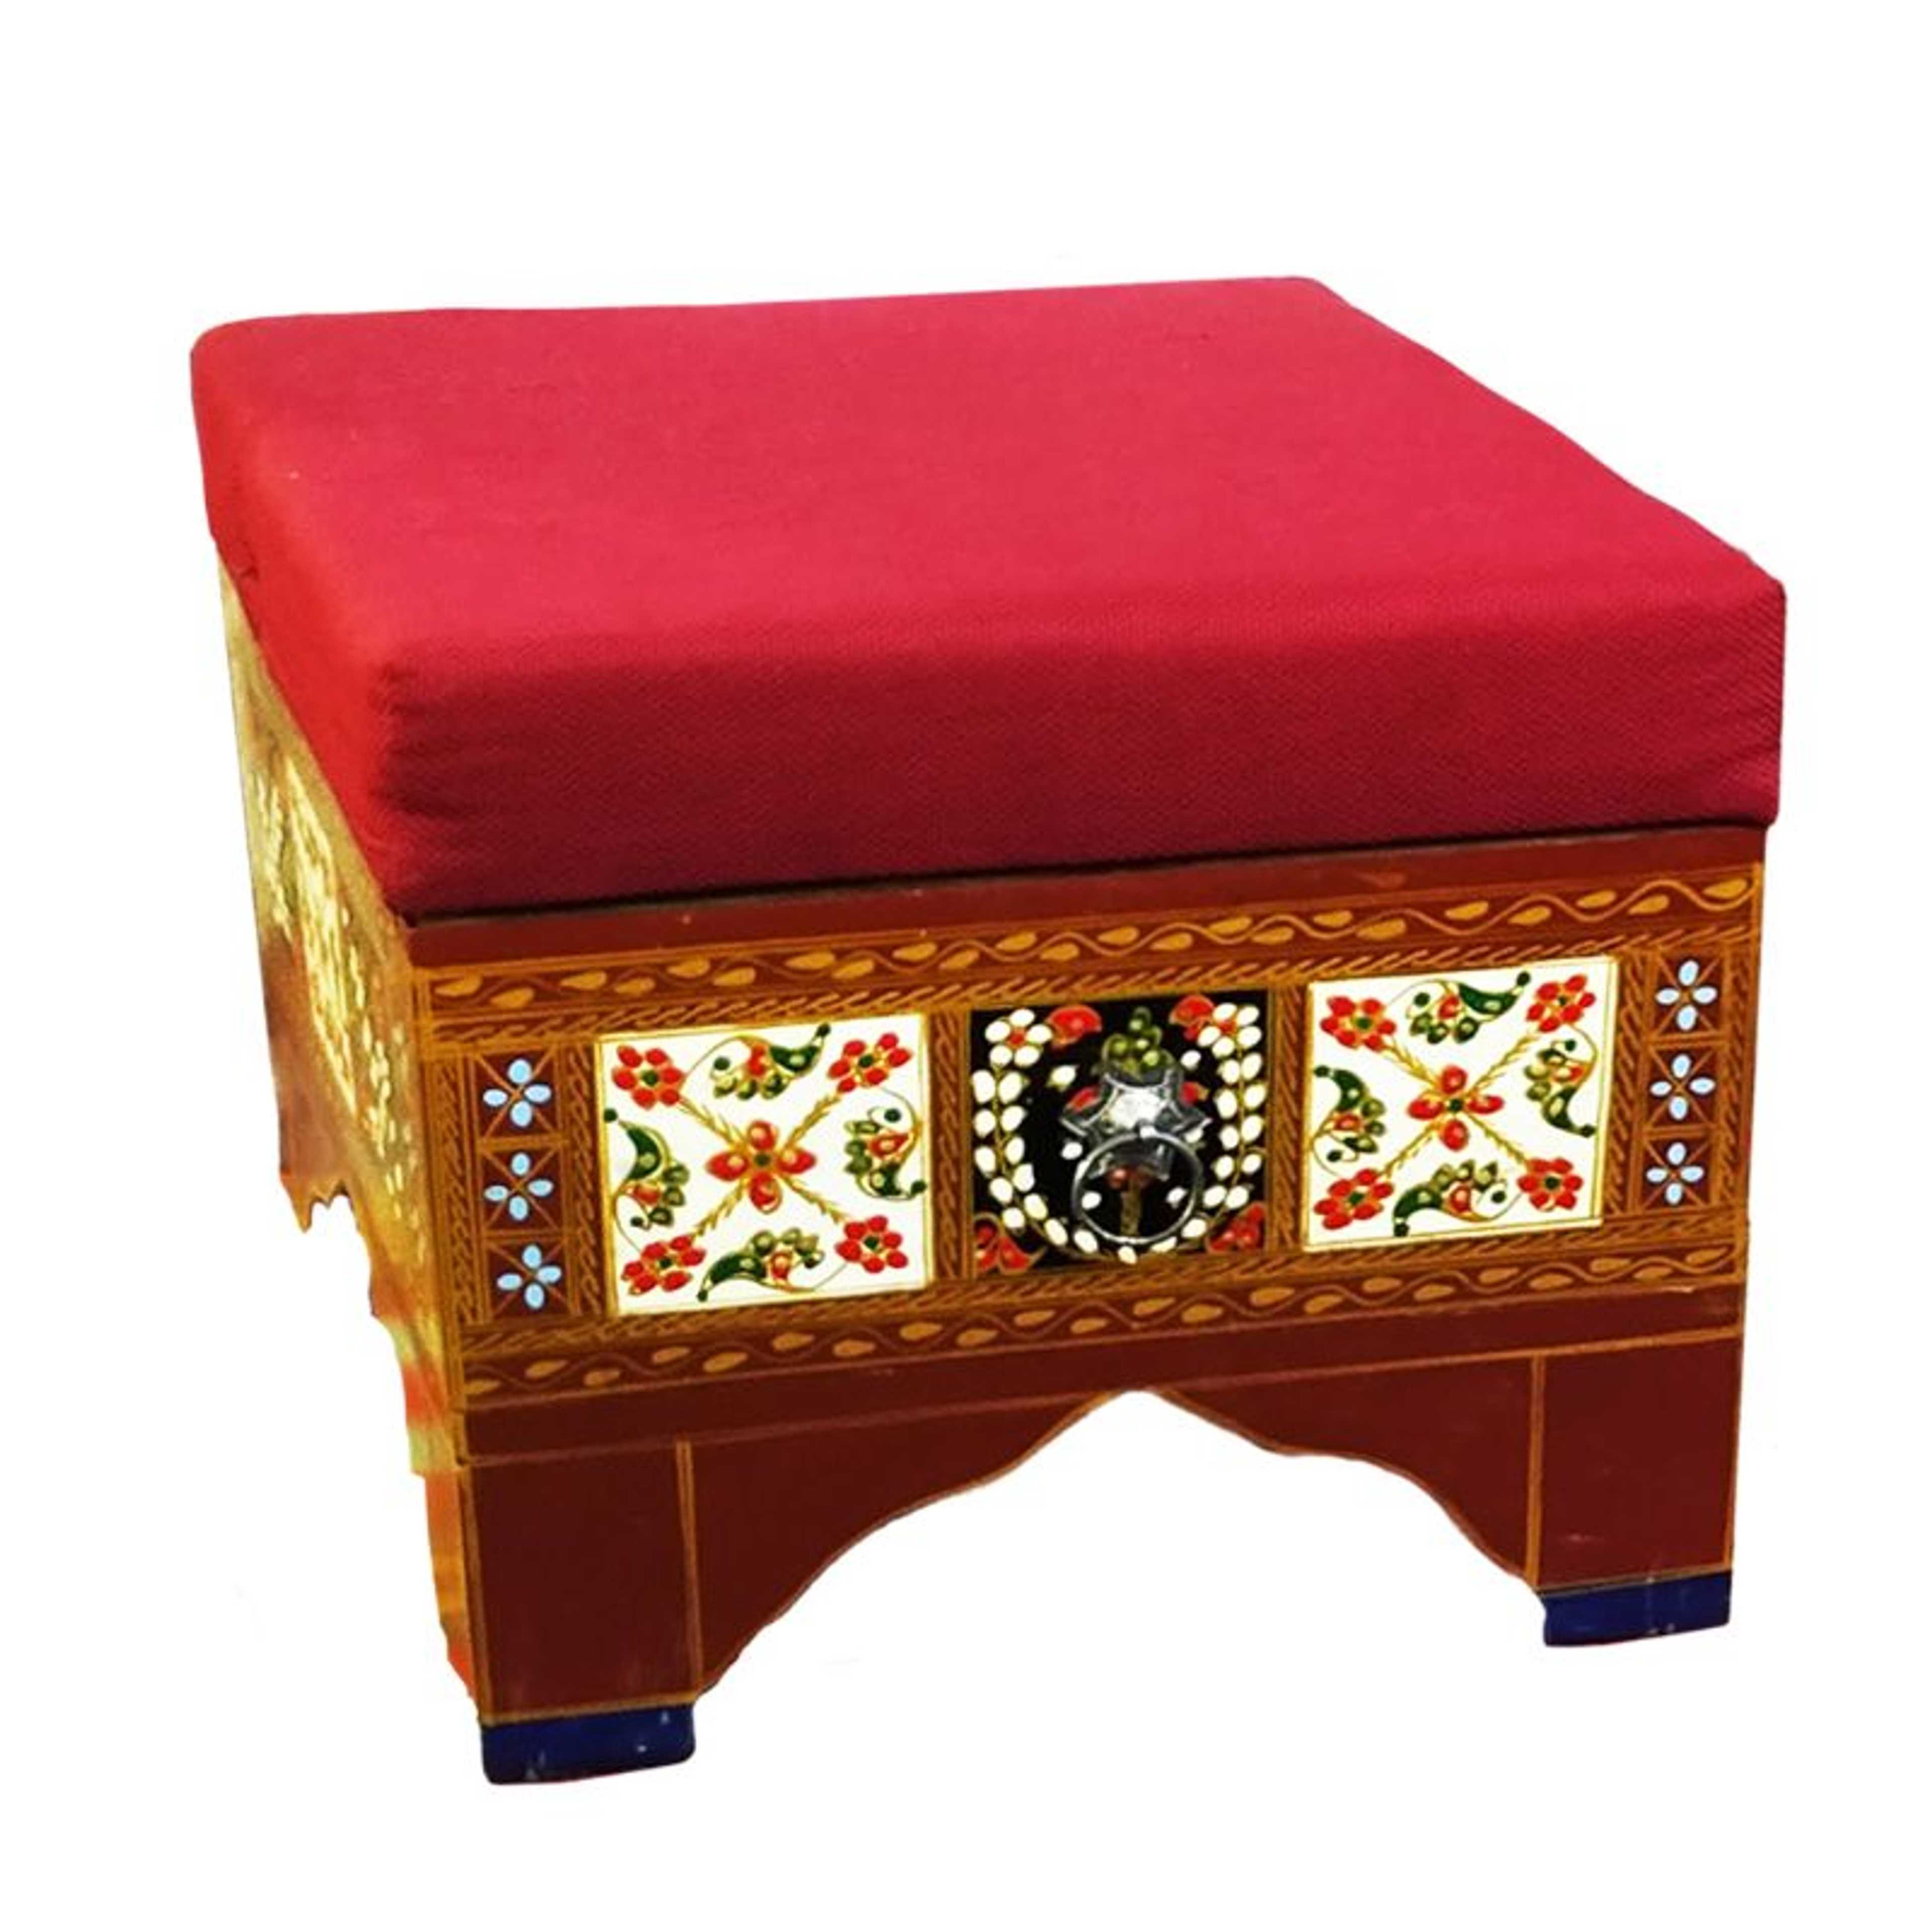 Ottoman With Kilim Fitting And Drawer Inside For Home